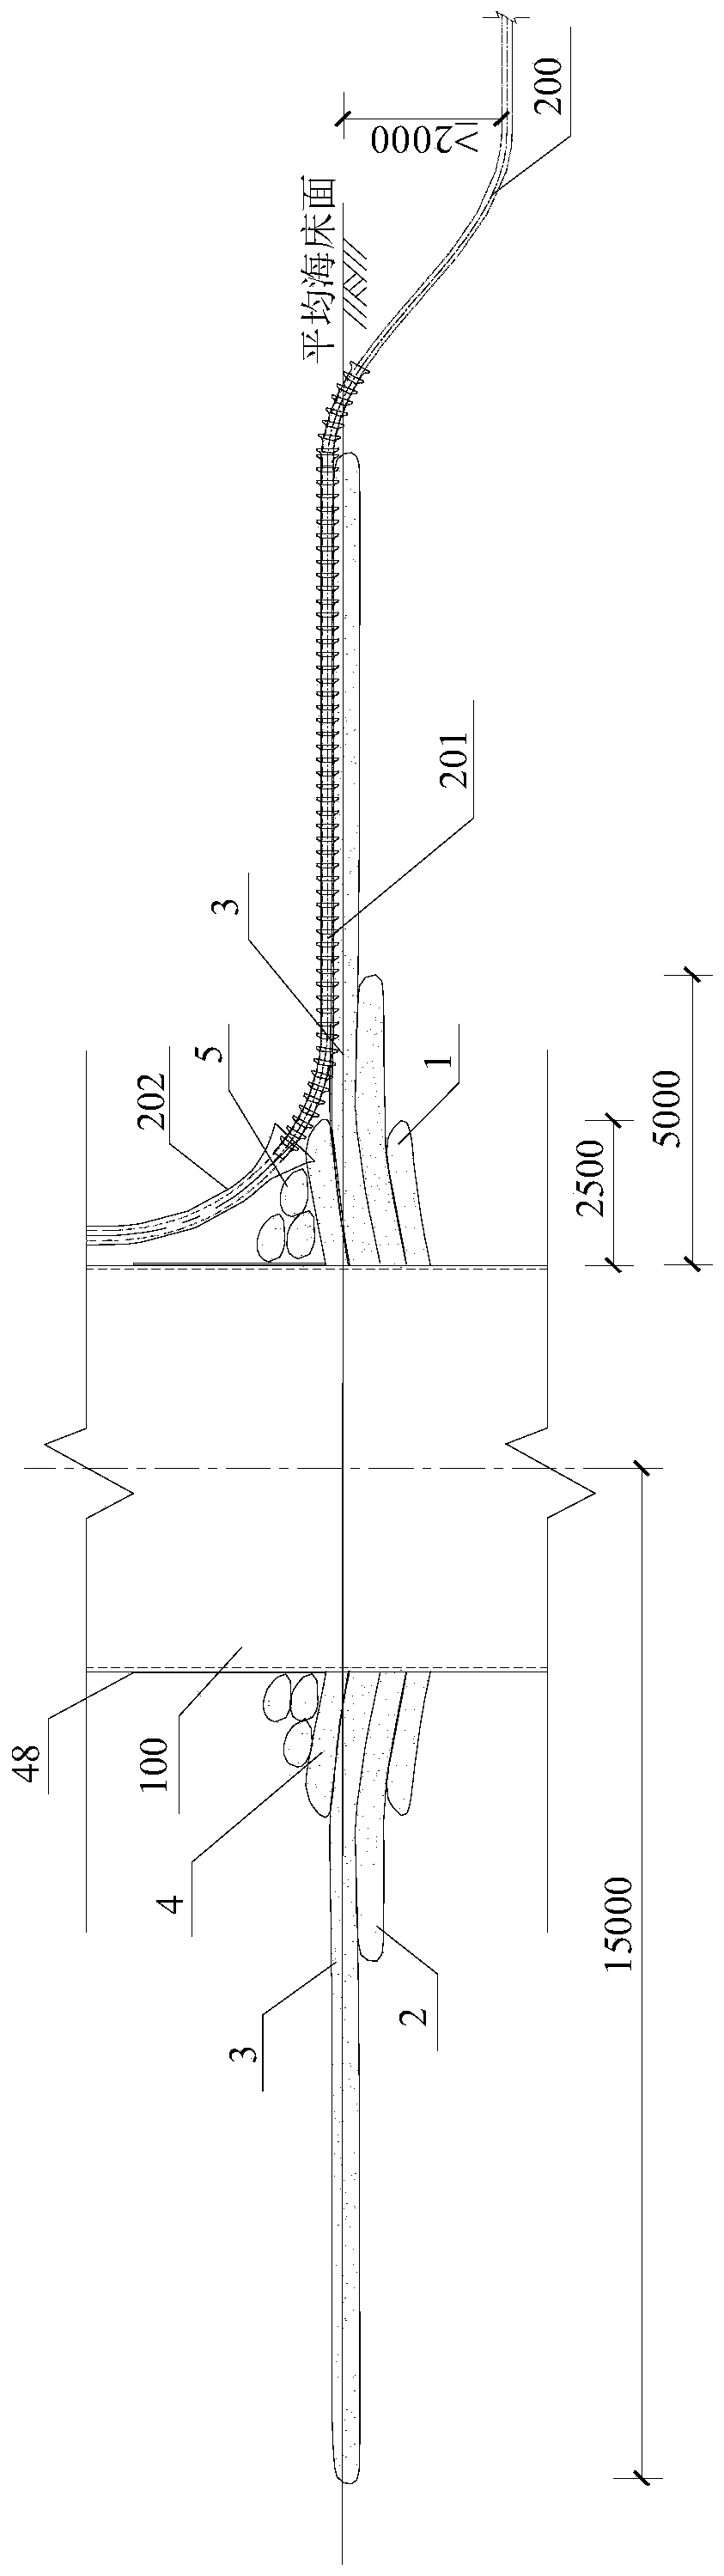 A scour protection structure of single pile for offshore wind turbine foundation